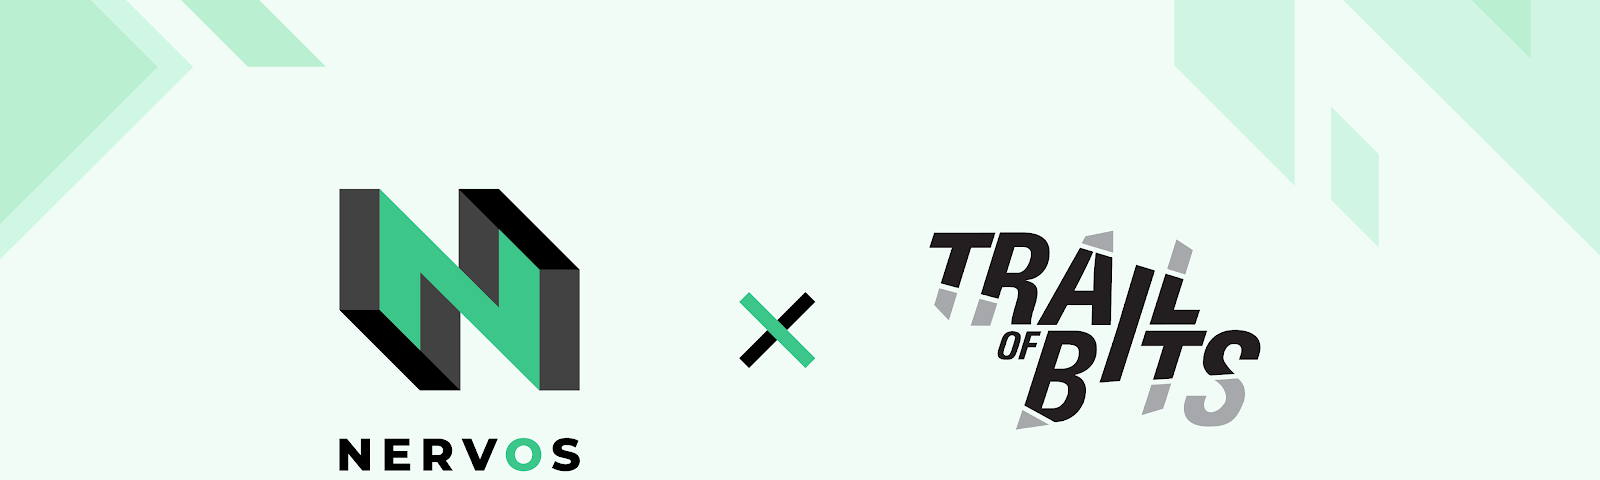 Nervos and Trail of Bits logos